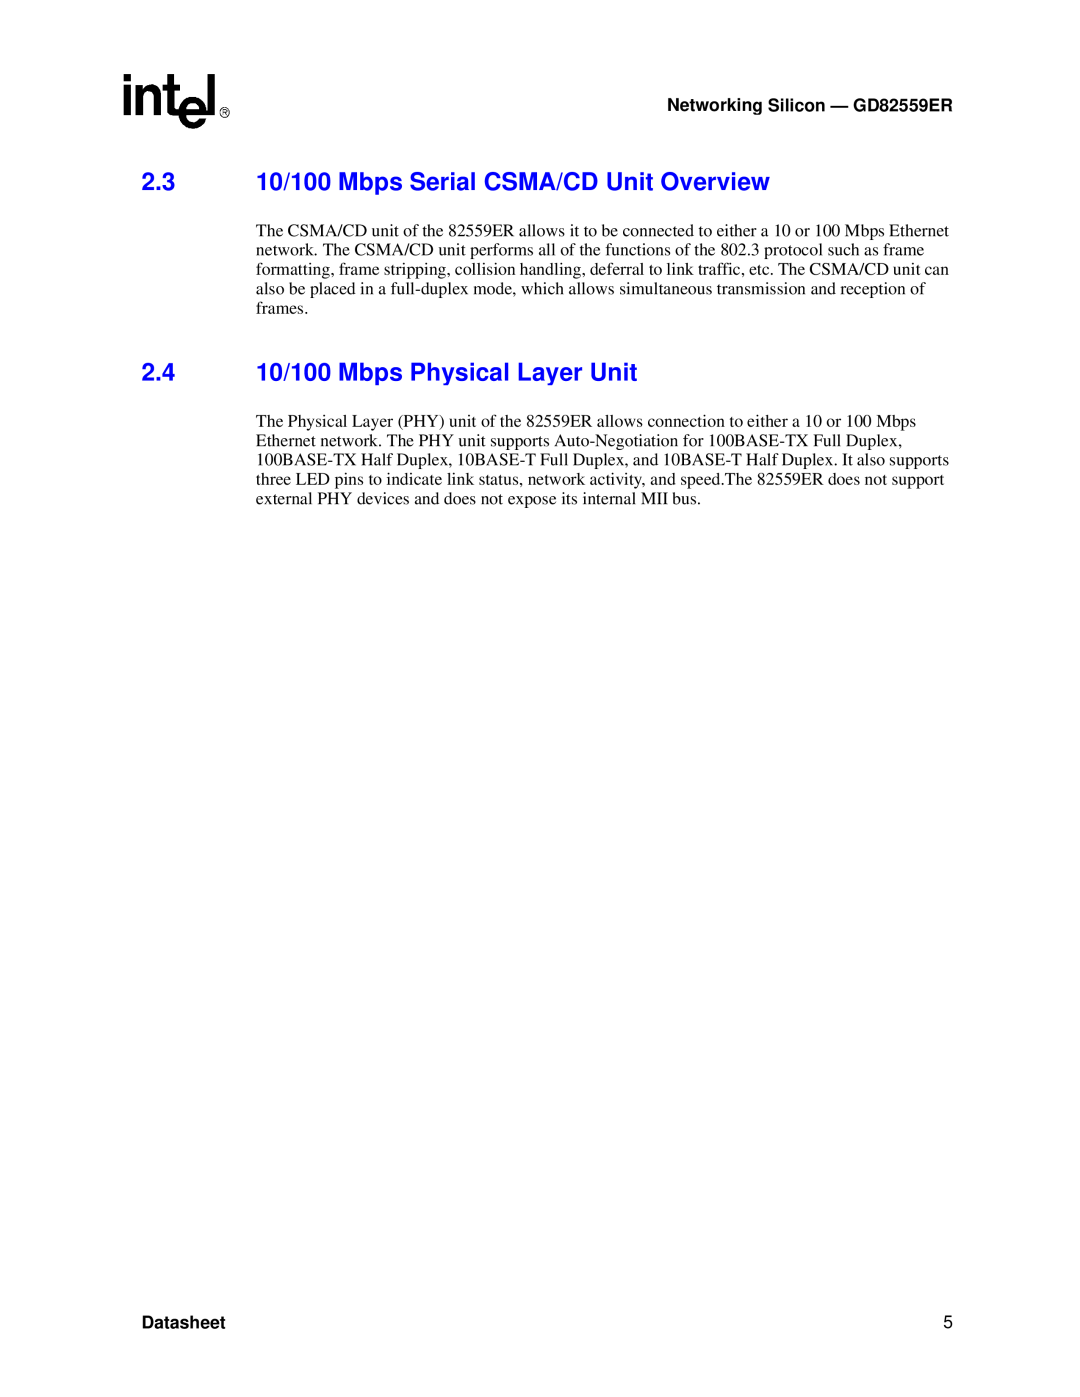 Intel GD82559ER manual 2.3 10/100 Mbps Serial CSMA/CD Unit Overview, 2.4 10/100 Mbps Physical Layer Unit, Datasheet 